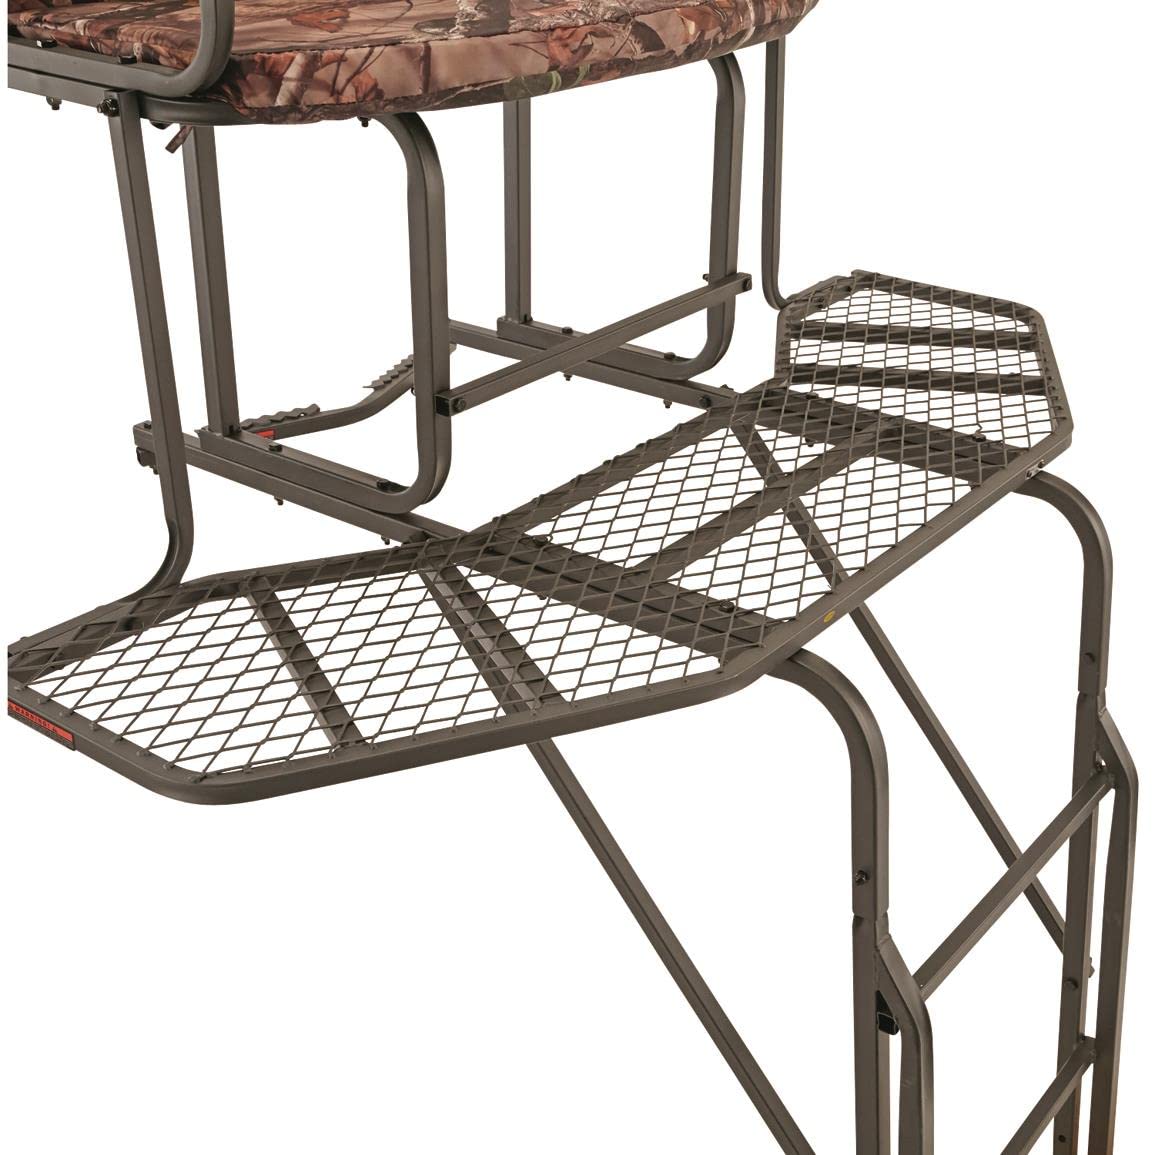 Guide Gear 20' 2-Man Ladder Tree Stand with Hunting Blind Climbing Hunt Seat, Hunting Gear Equipment Accessories